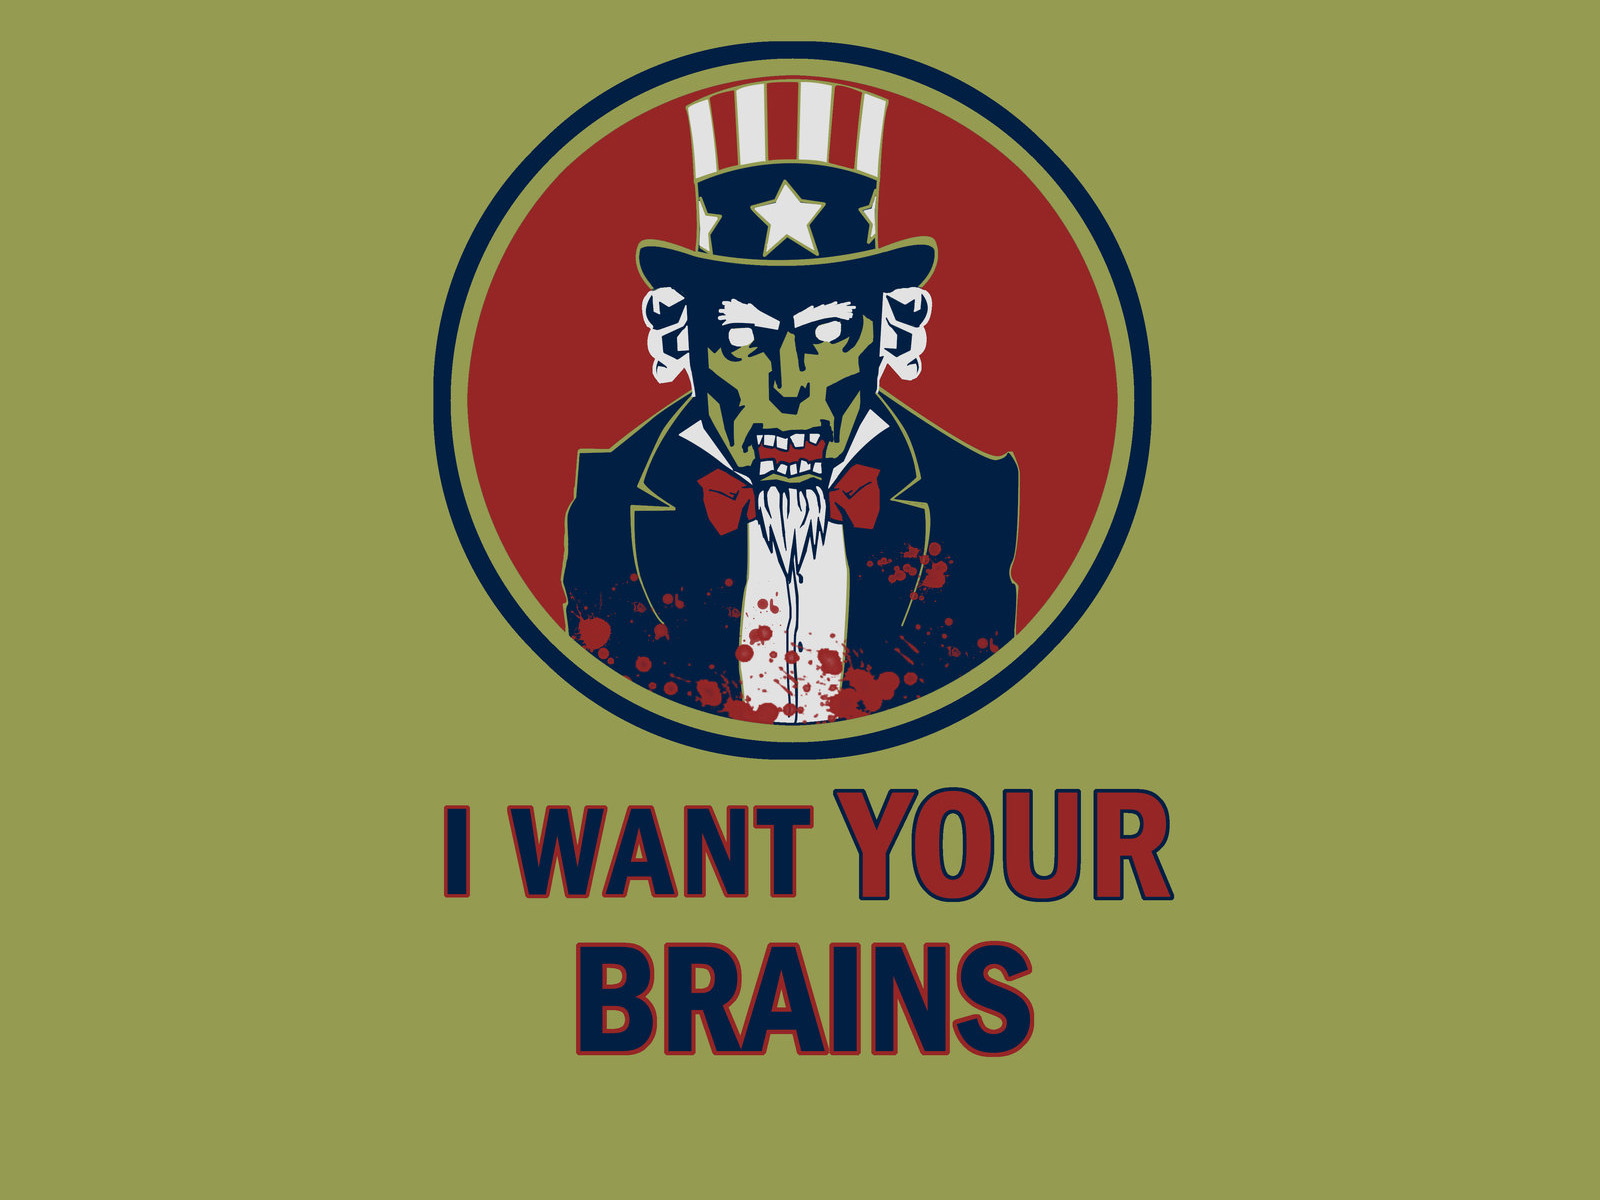 we want your brain - I Want Your Brains